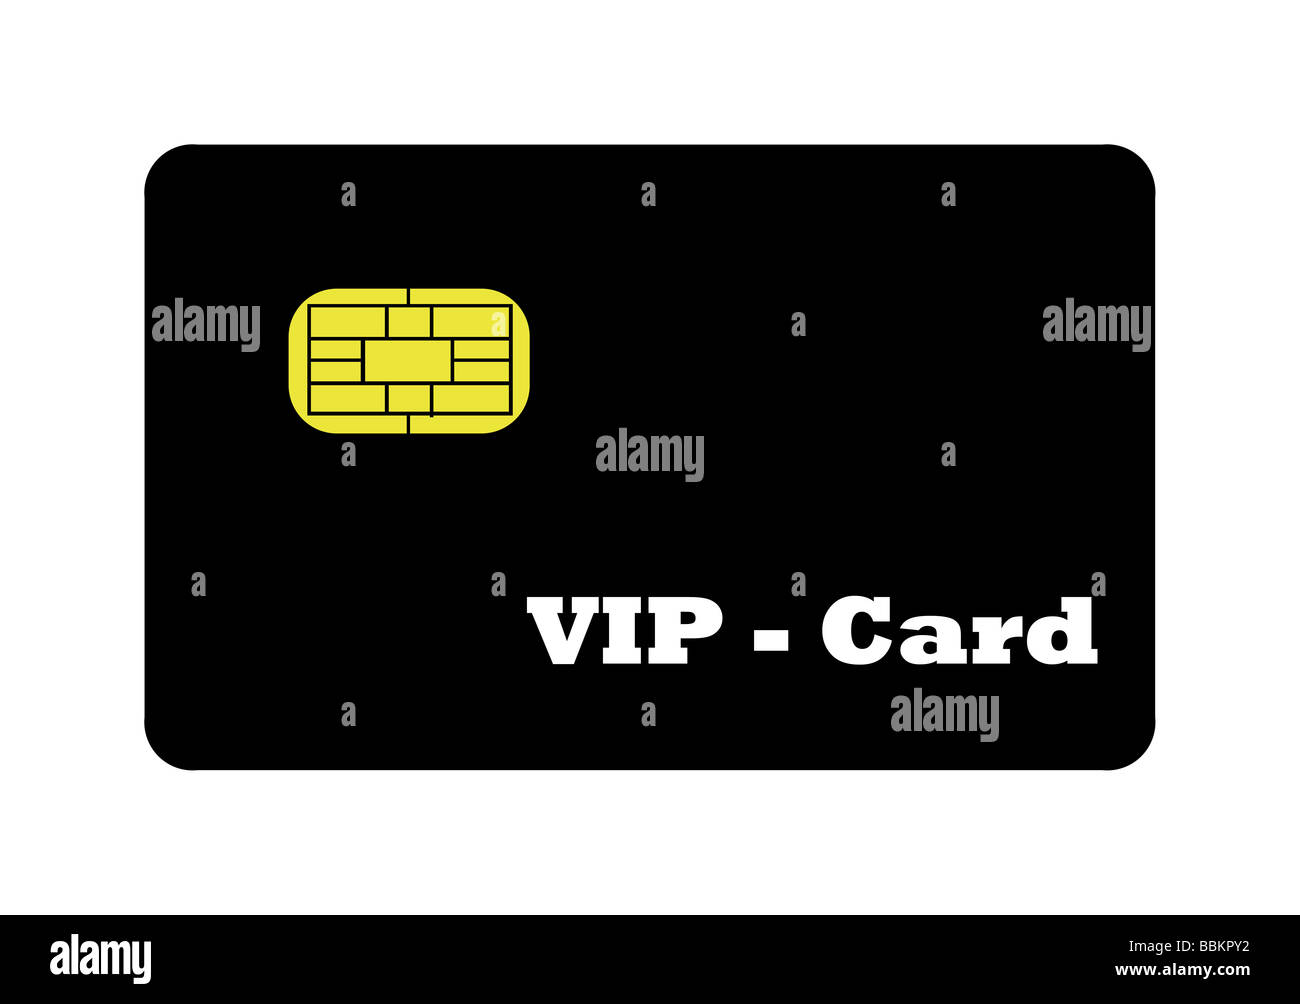 VIP card in black with biometric strip isolated on white background Stock Photo